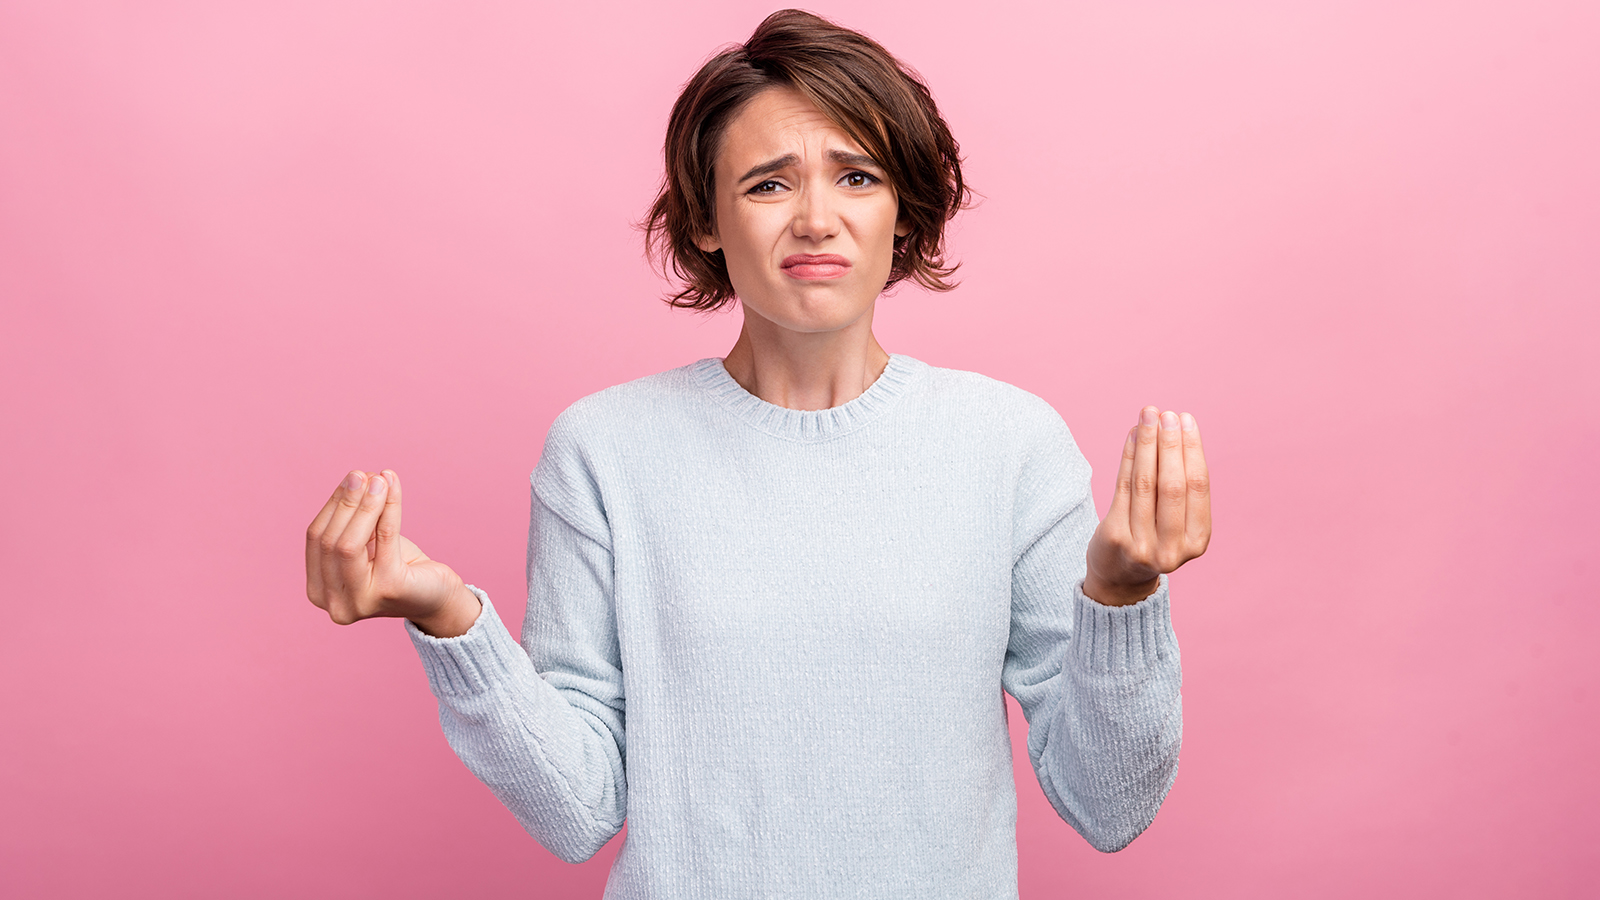 Photo of unhappy upset sad woman hold hand gesture money demand bad mood isolated on pink color background